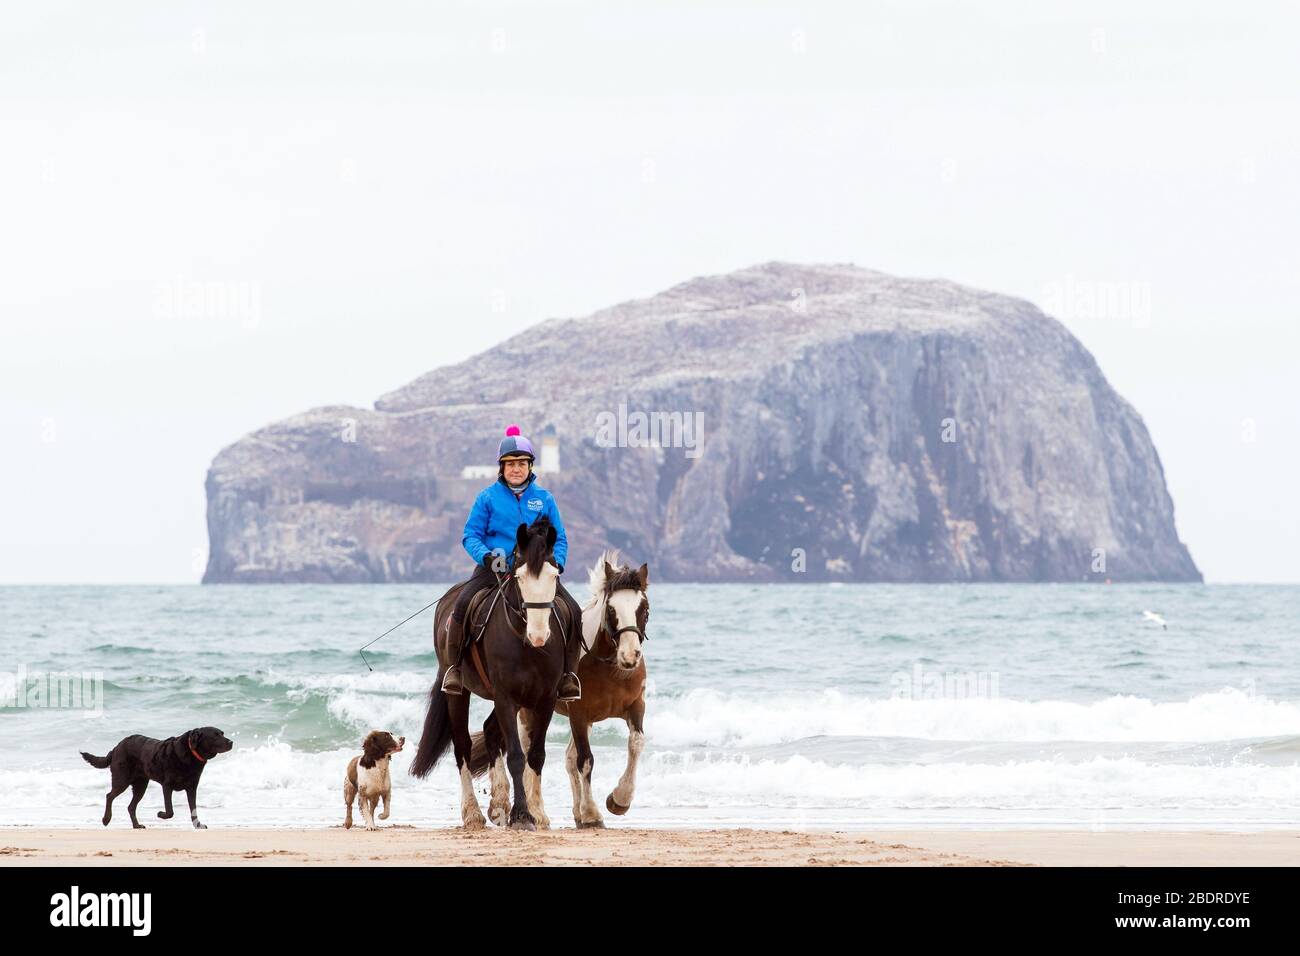 Carol Boswell of Seacliff Stables near North Berwick takes her Carriage Horses Percy and Woody for a stroll and some exercise along Seacliff Bay joine Stock Photo